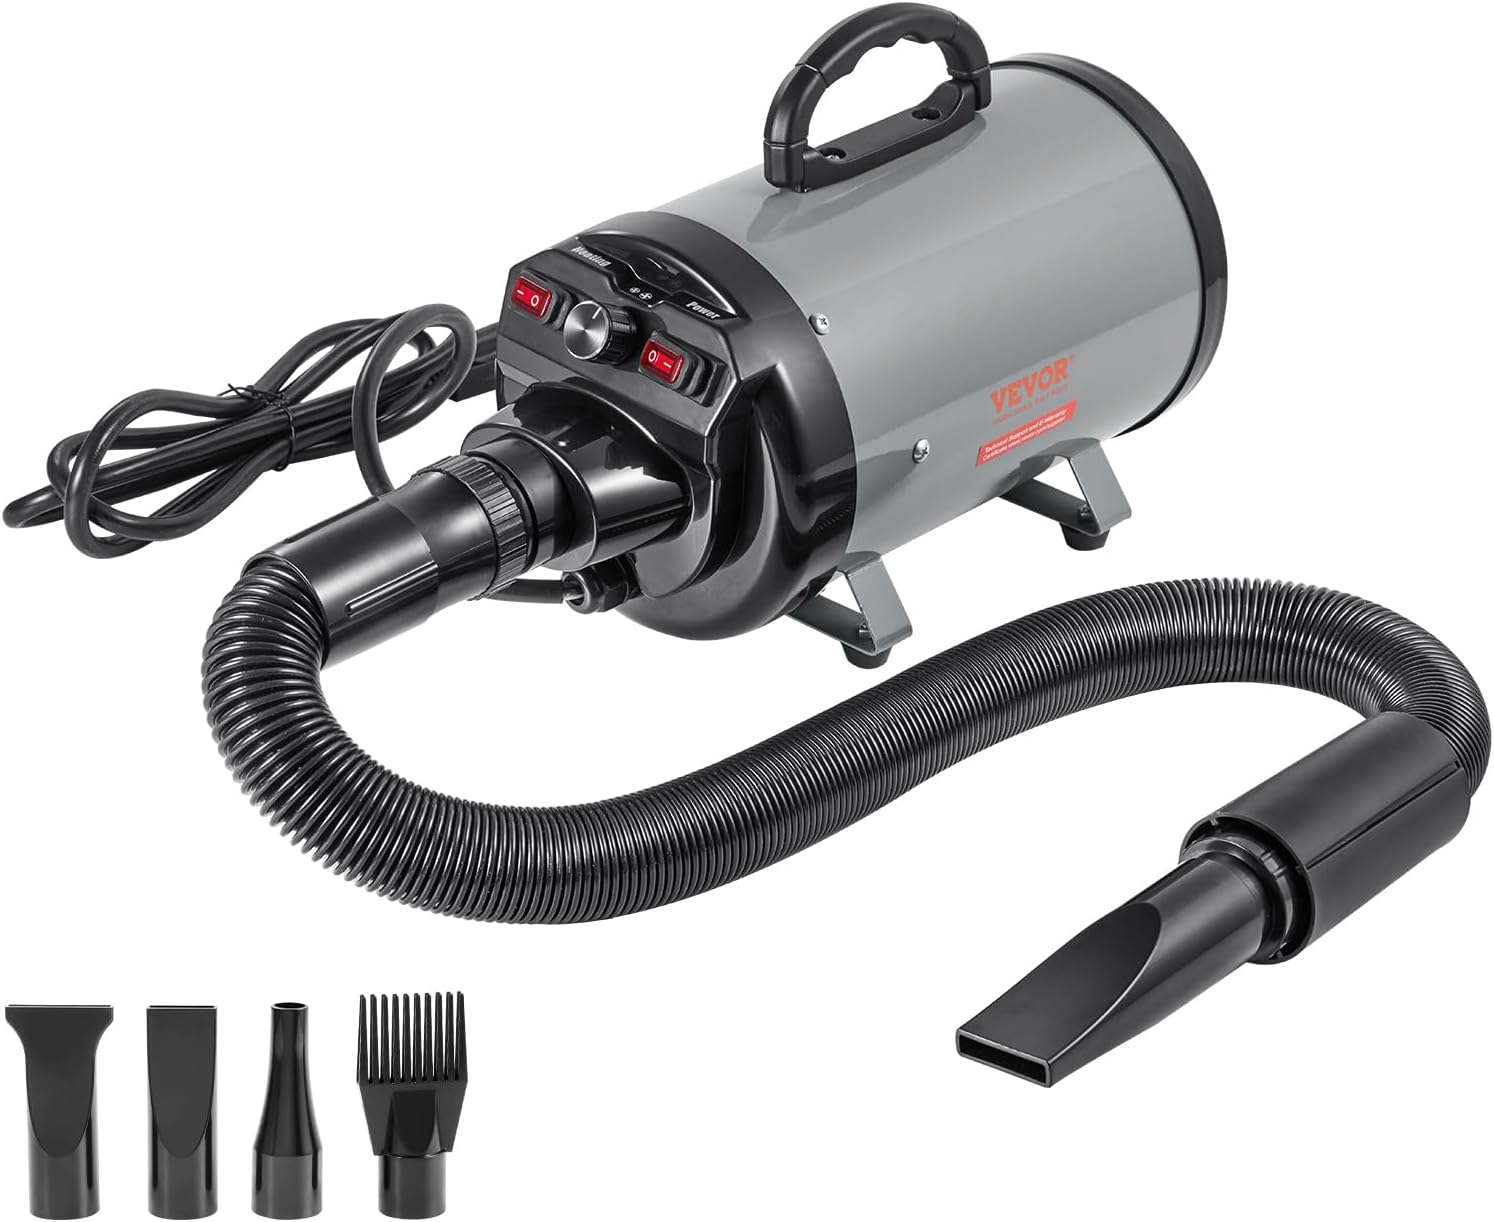 Dog Dryer, 2800W/4.3 HP Dog Blow Dryer, Pet Grooming Dryer with Adjustable Speed and Temperature Control, Pet Hair Dryer with 4 Nozzles and Extendable Hose (Grey and Black)